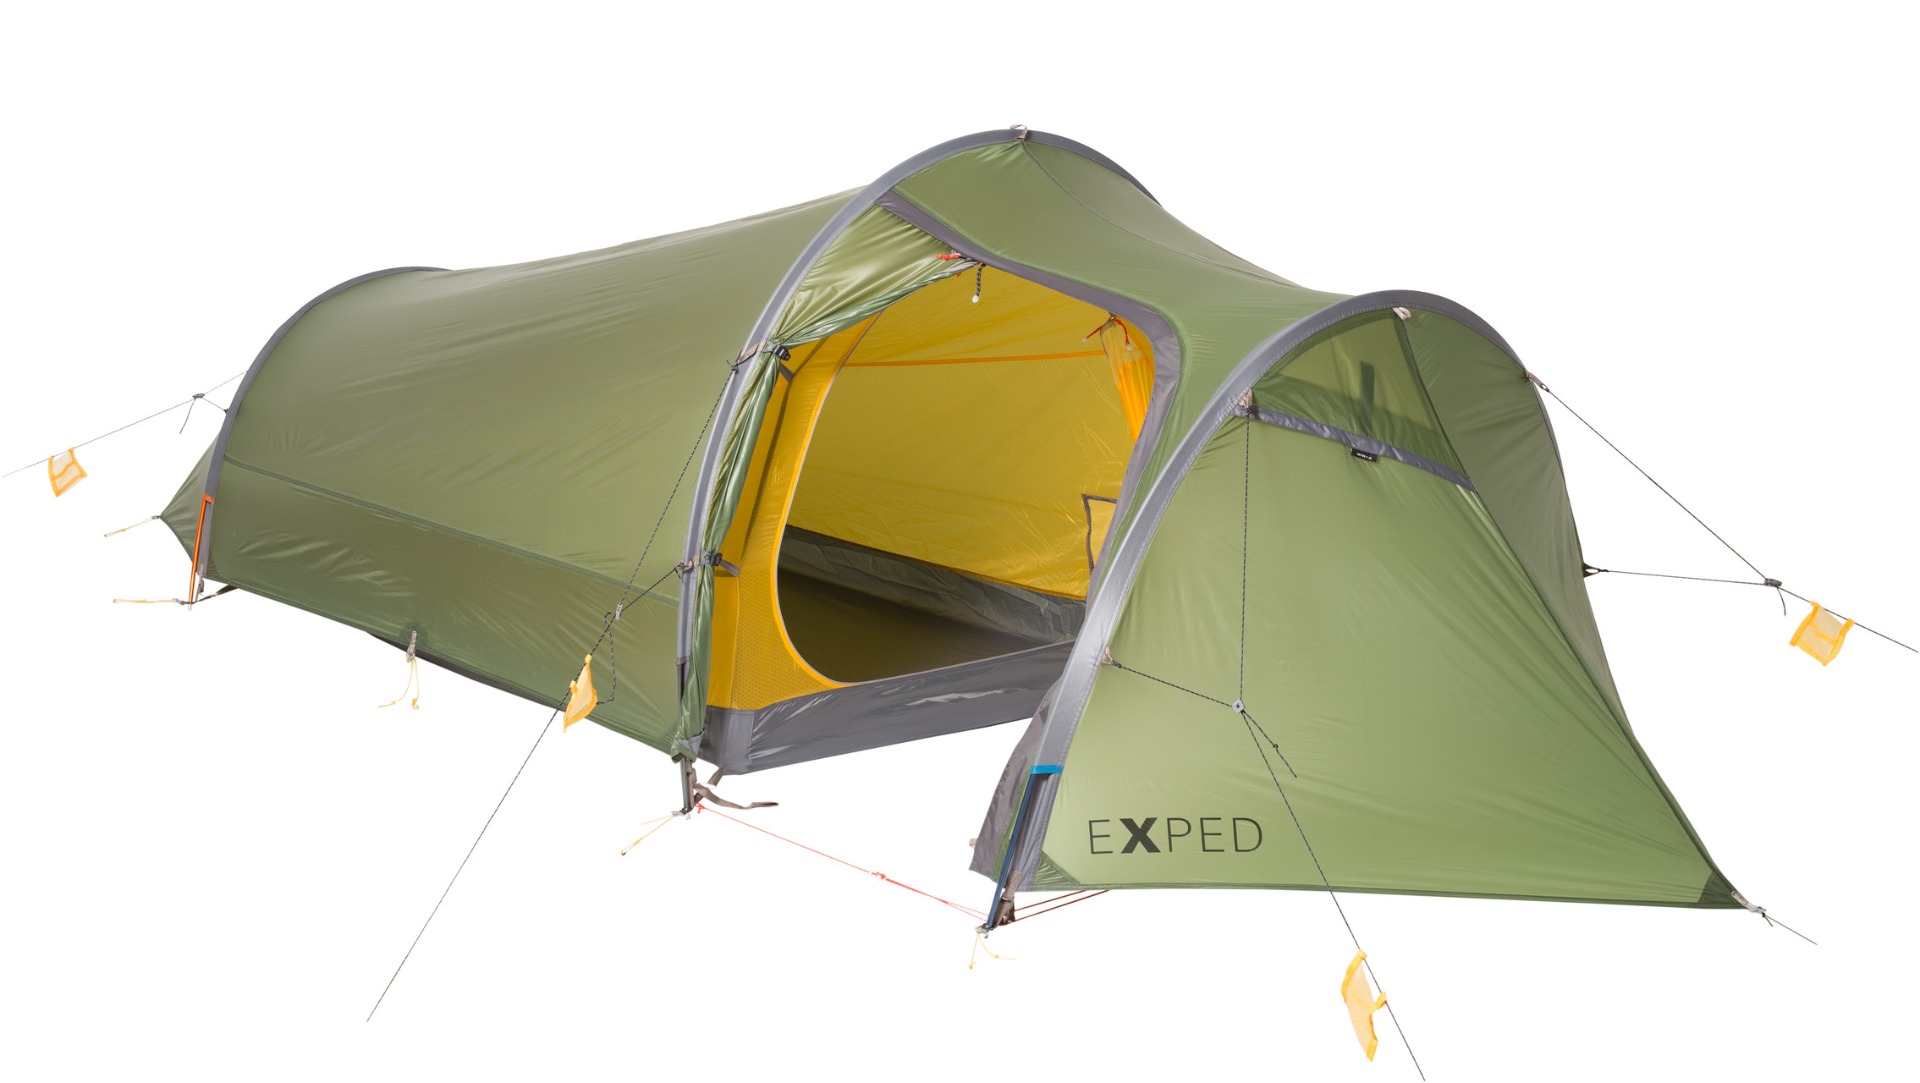 EXPED EXPED Cetus II UL green -